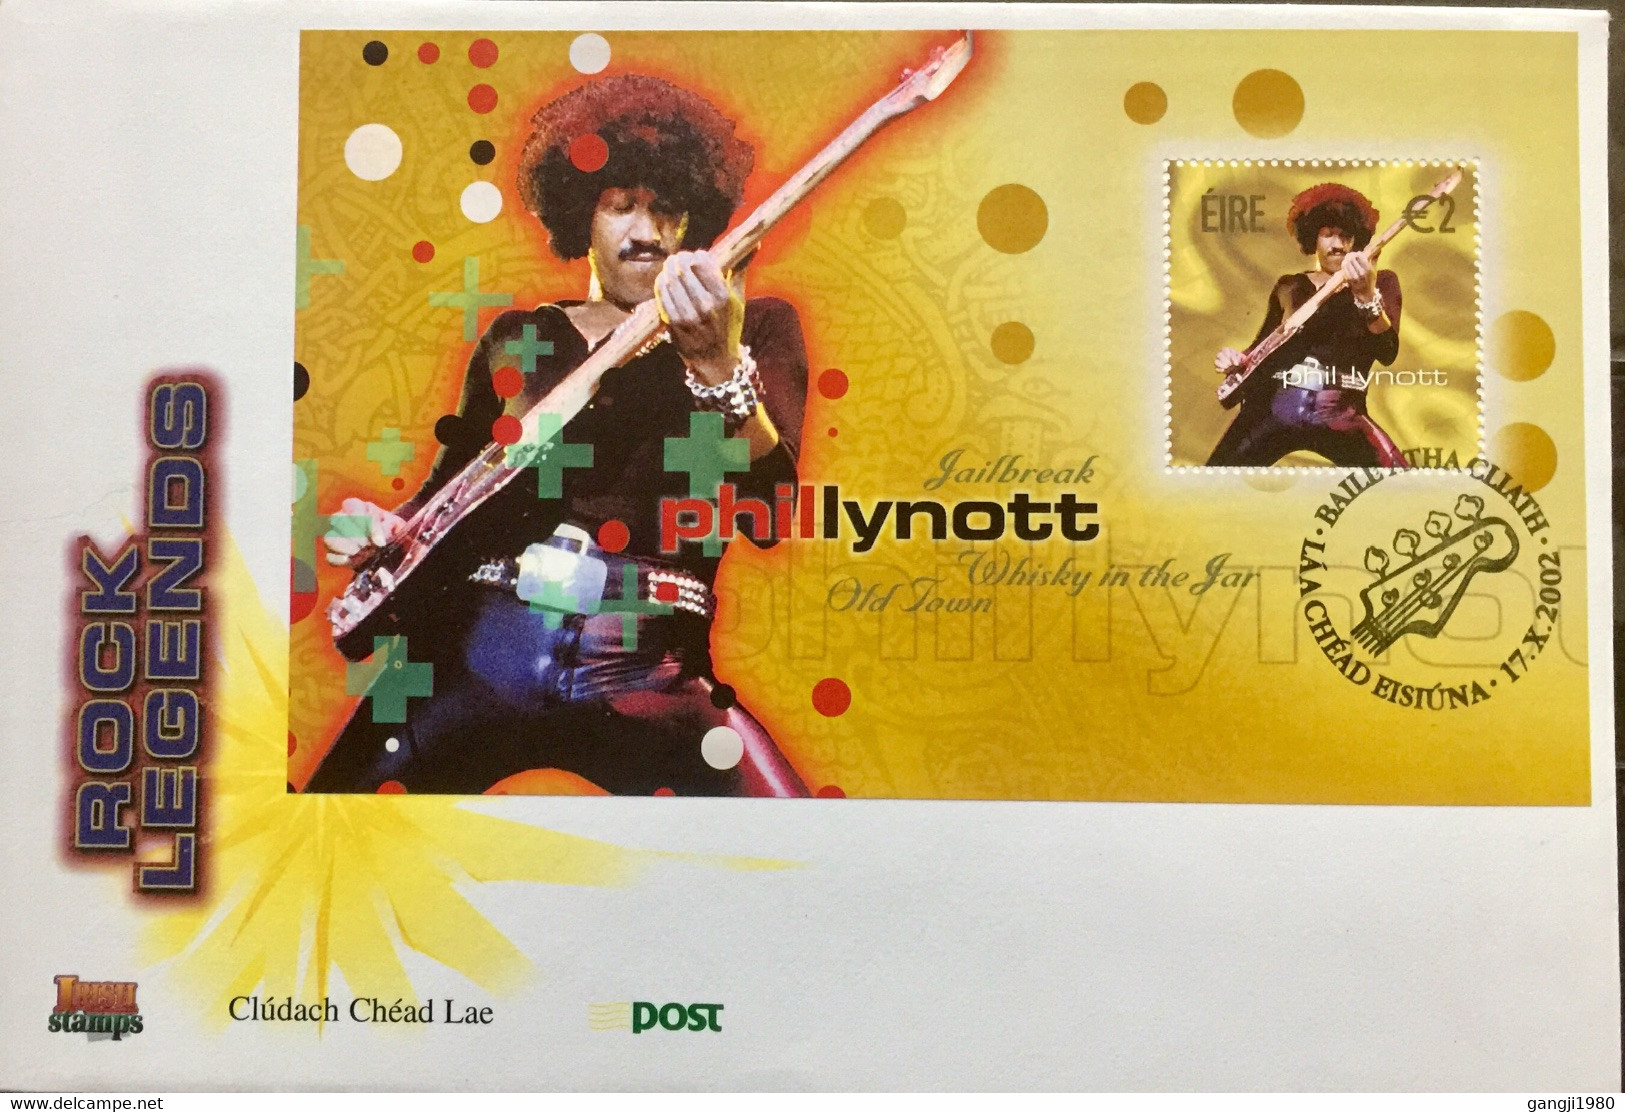 IRELAND 2002, FDC COVER  BLOCK ,MINIATURE SHEET,PHILL LYNOTT ON COVER,ROCK MUSIC - Covers & Documents